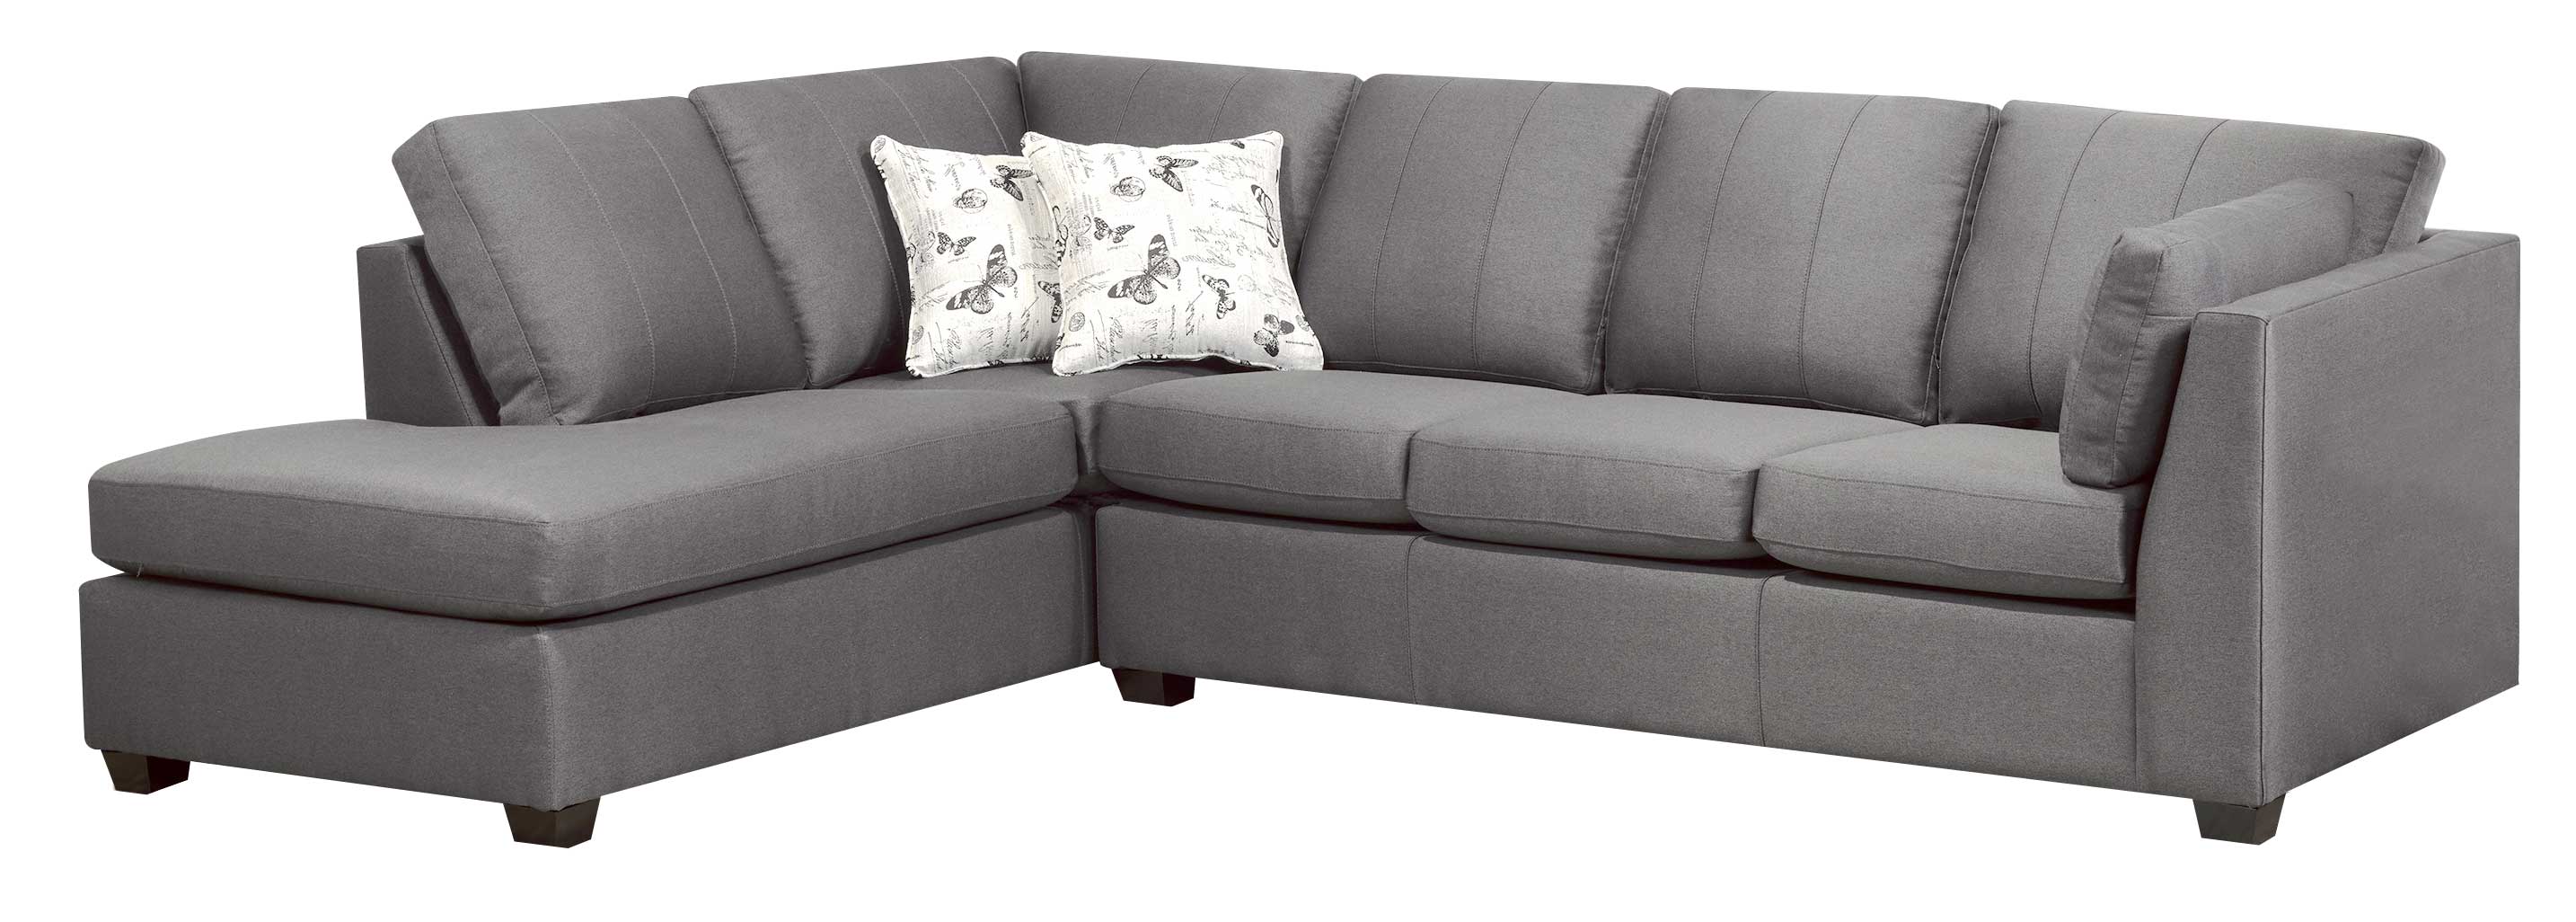 9830 canadian made sectional sofa left chaise